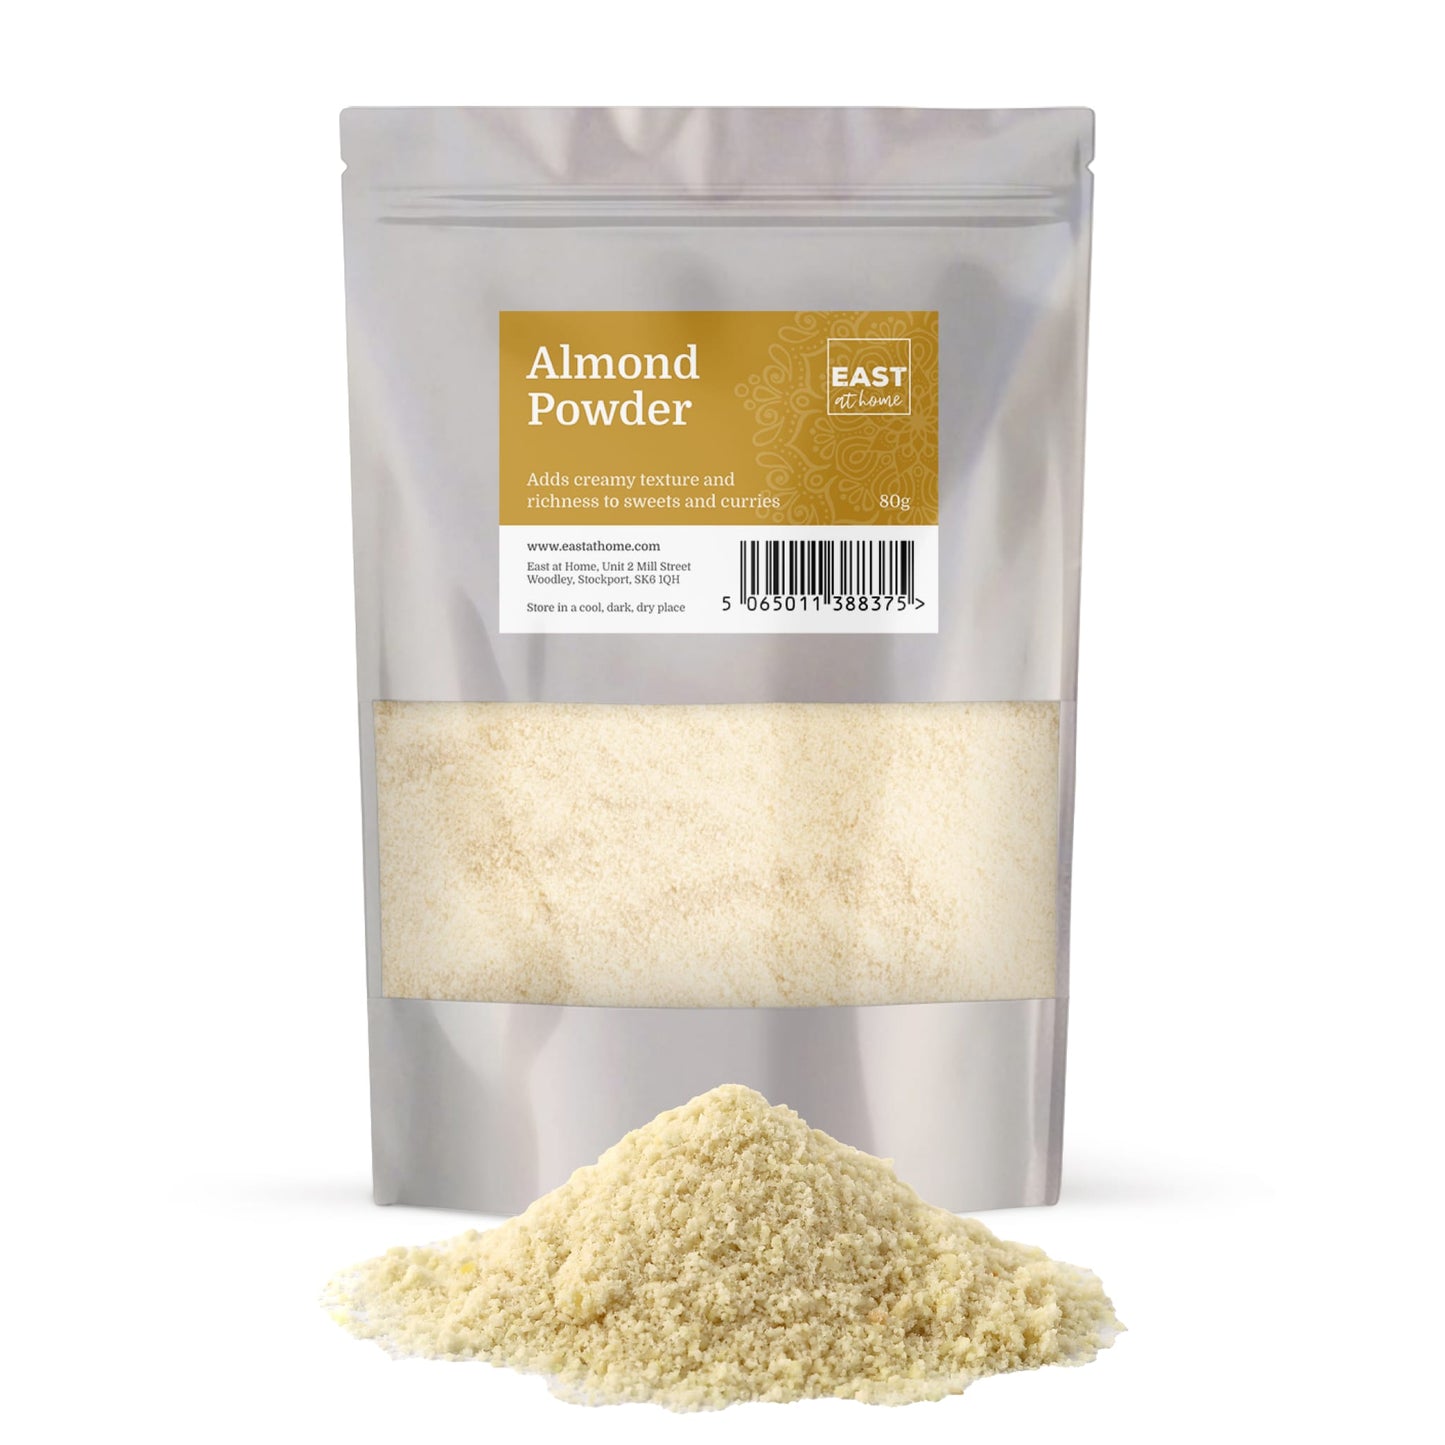 Almond Powder - East at Home